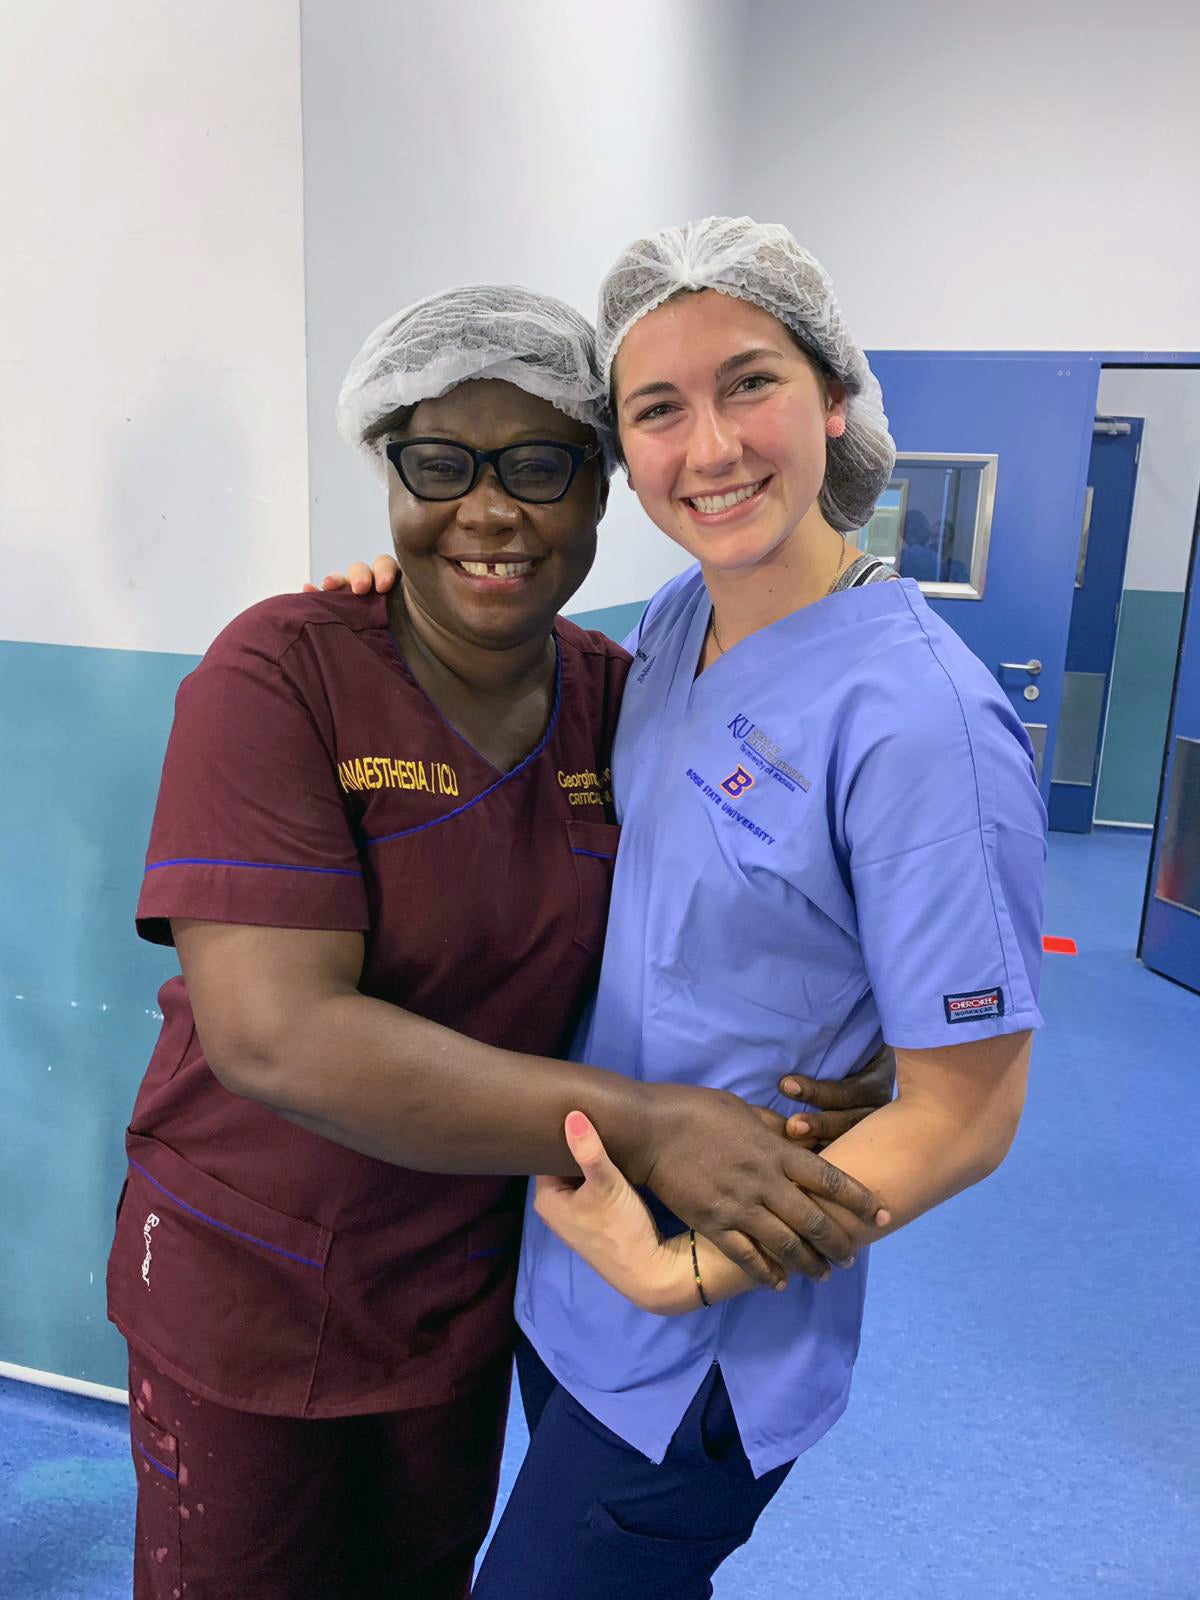 Abbey Sorensen and a healthcare provider from Ghana.